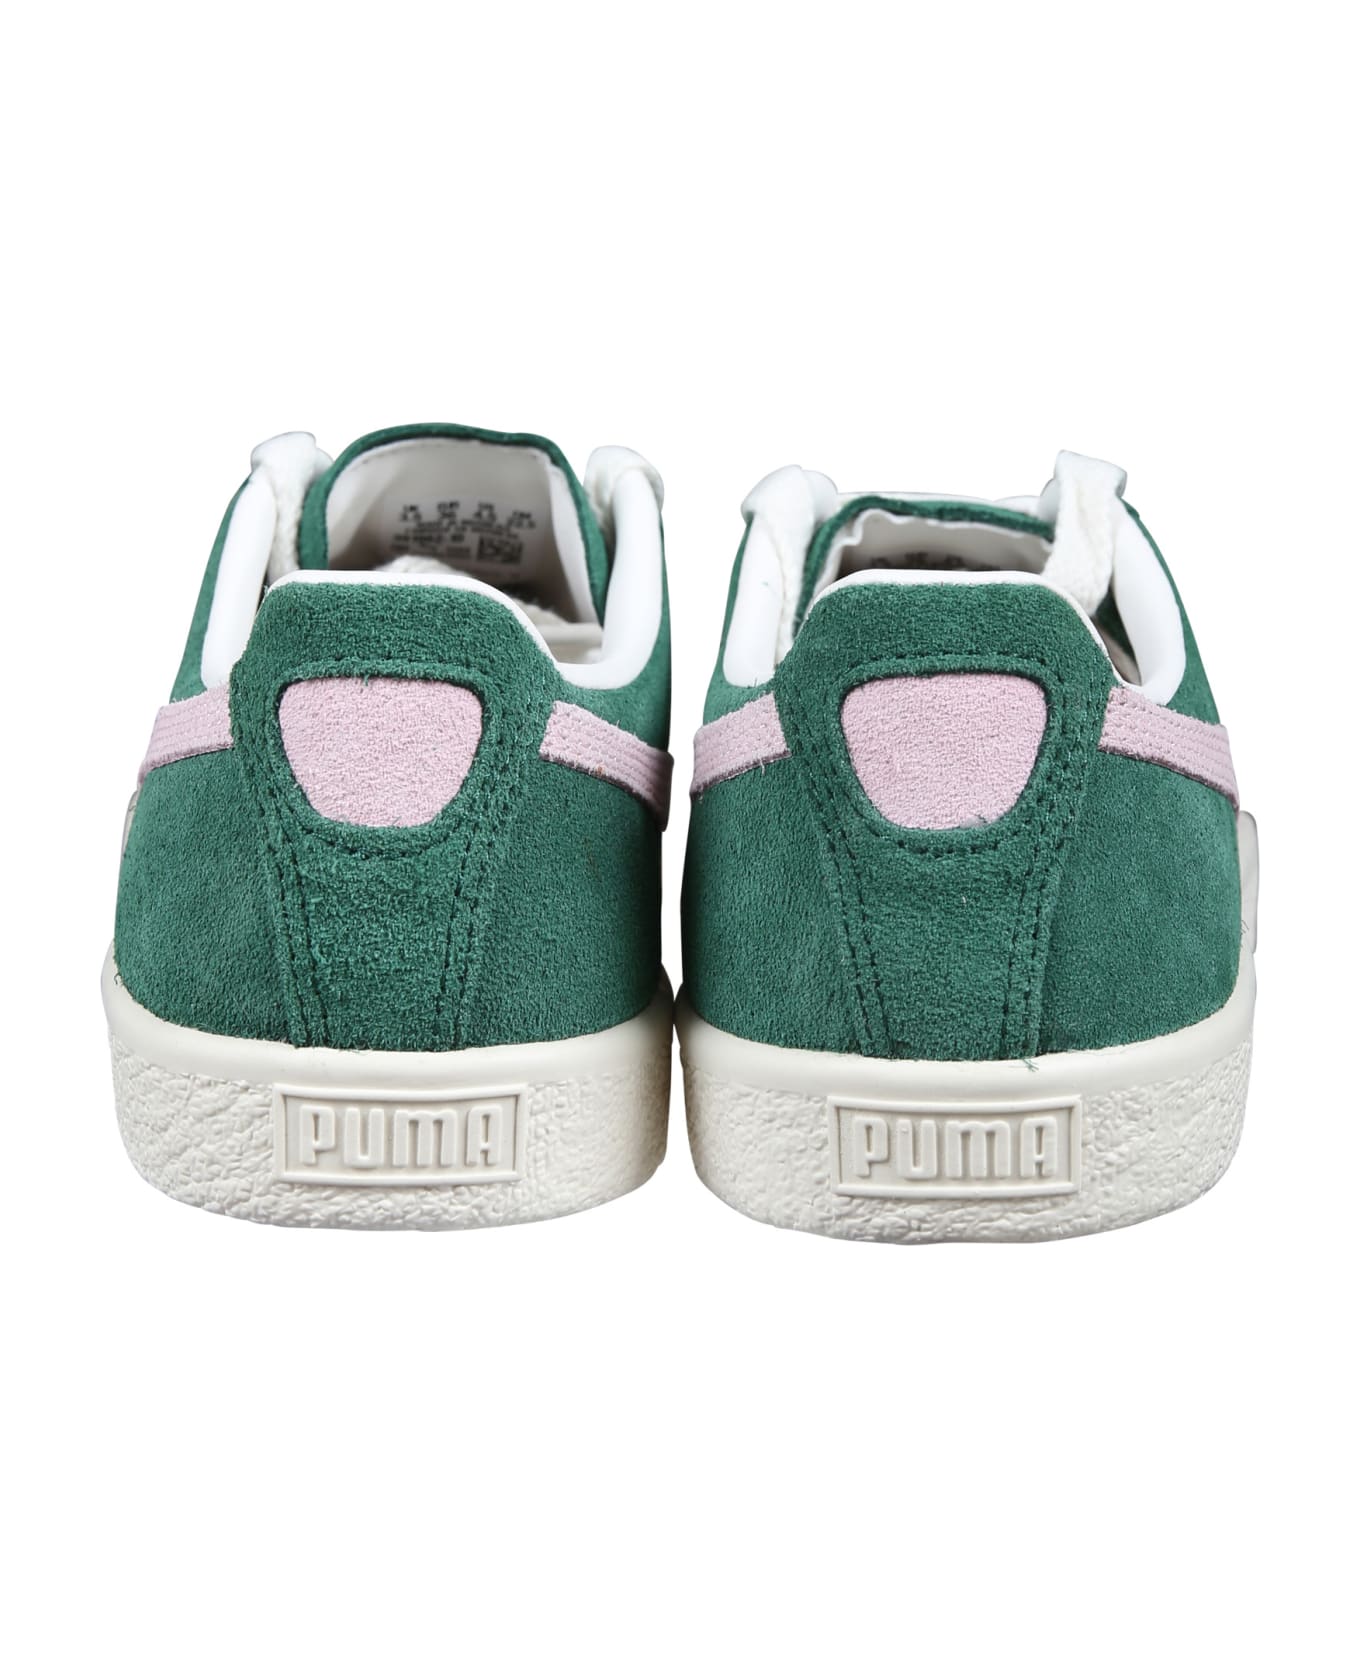 Puma Green Clyde Sneakers For Kids With Logo - Green シューズ